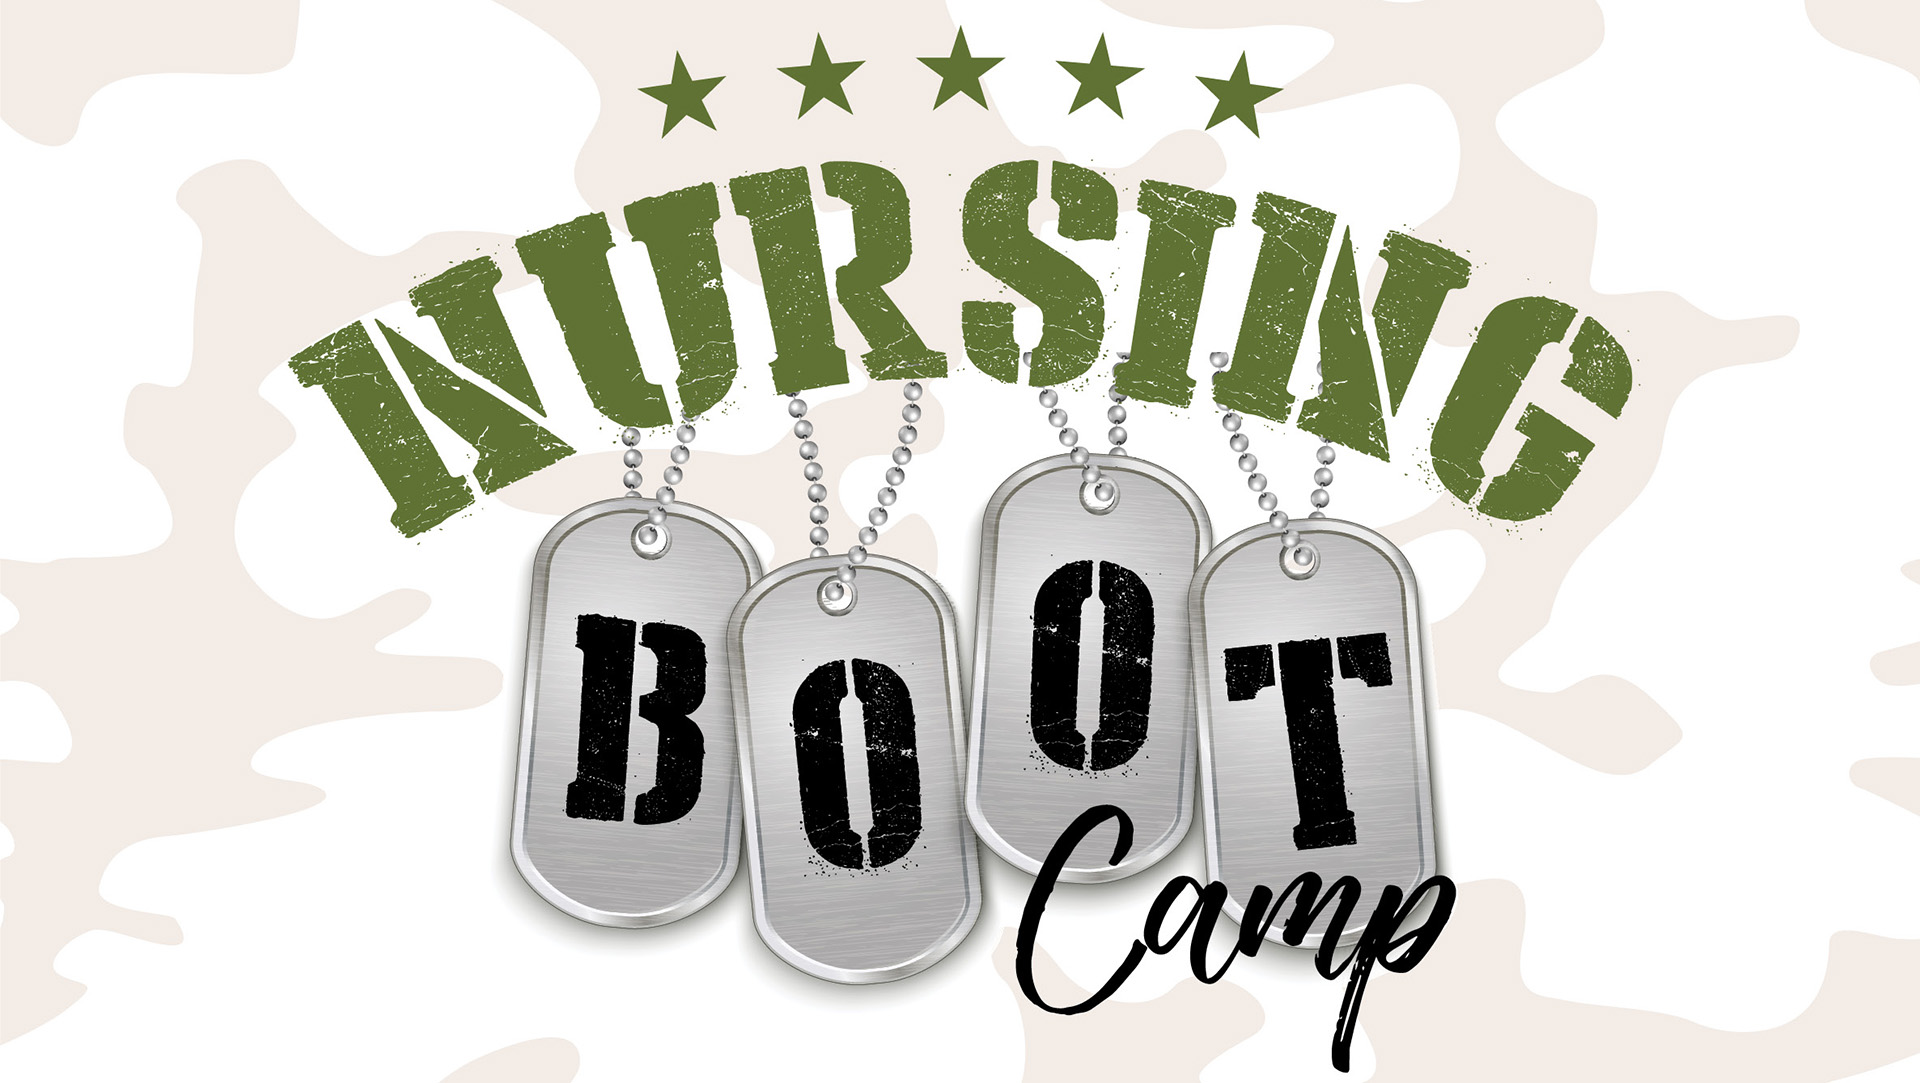 Nursing Boot Camp applications now available